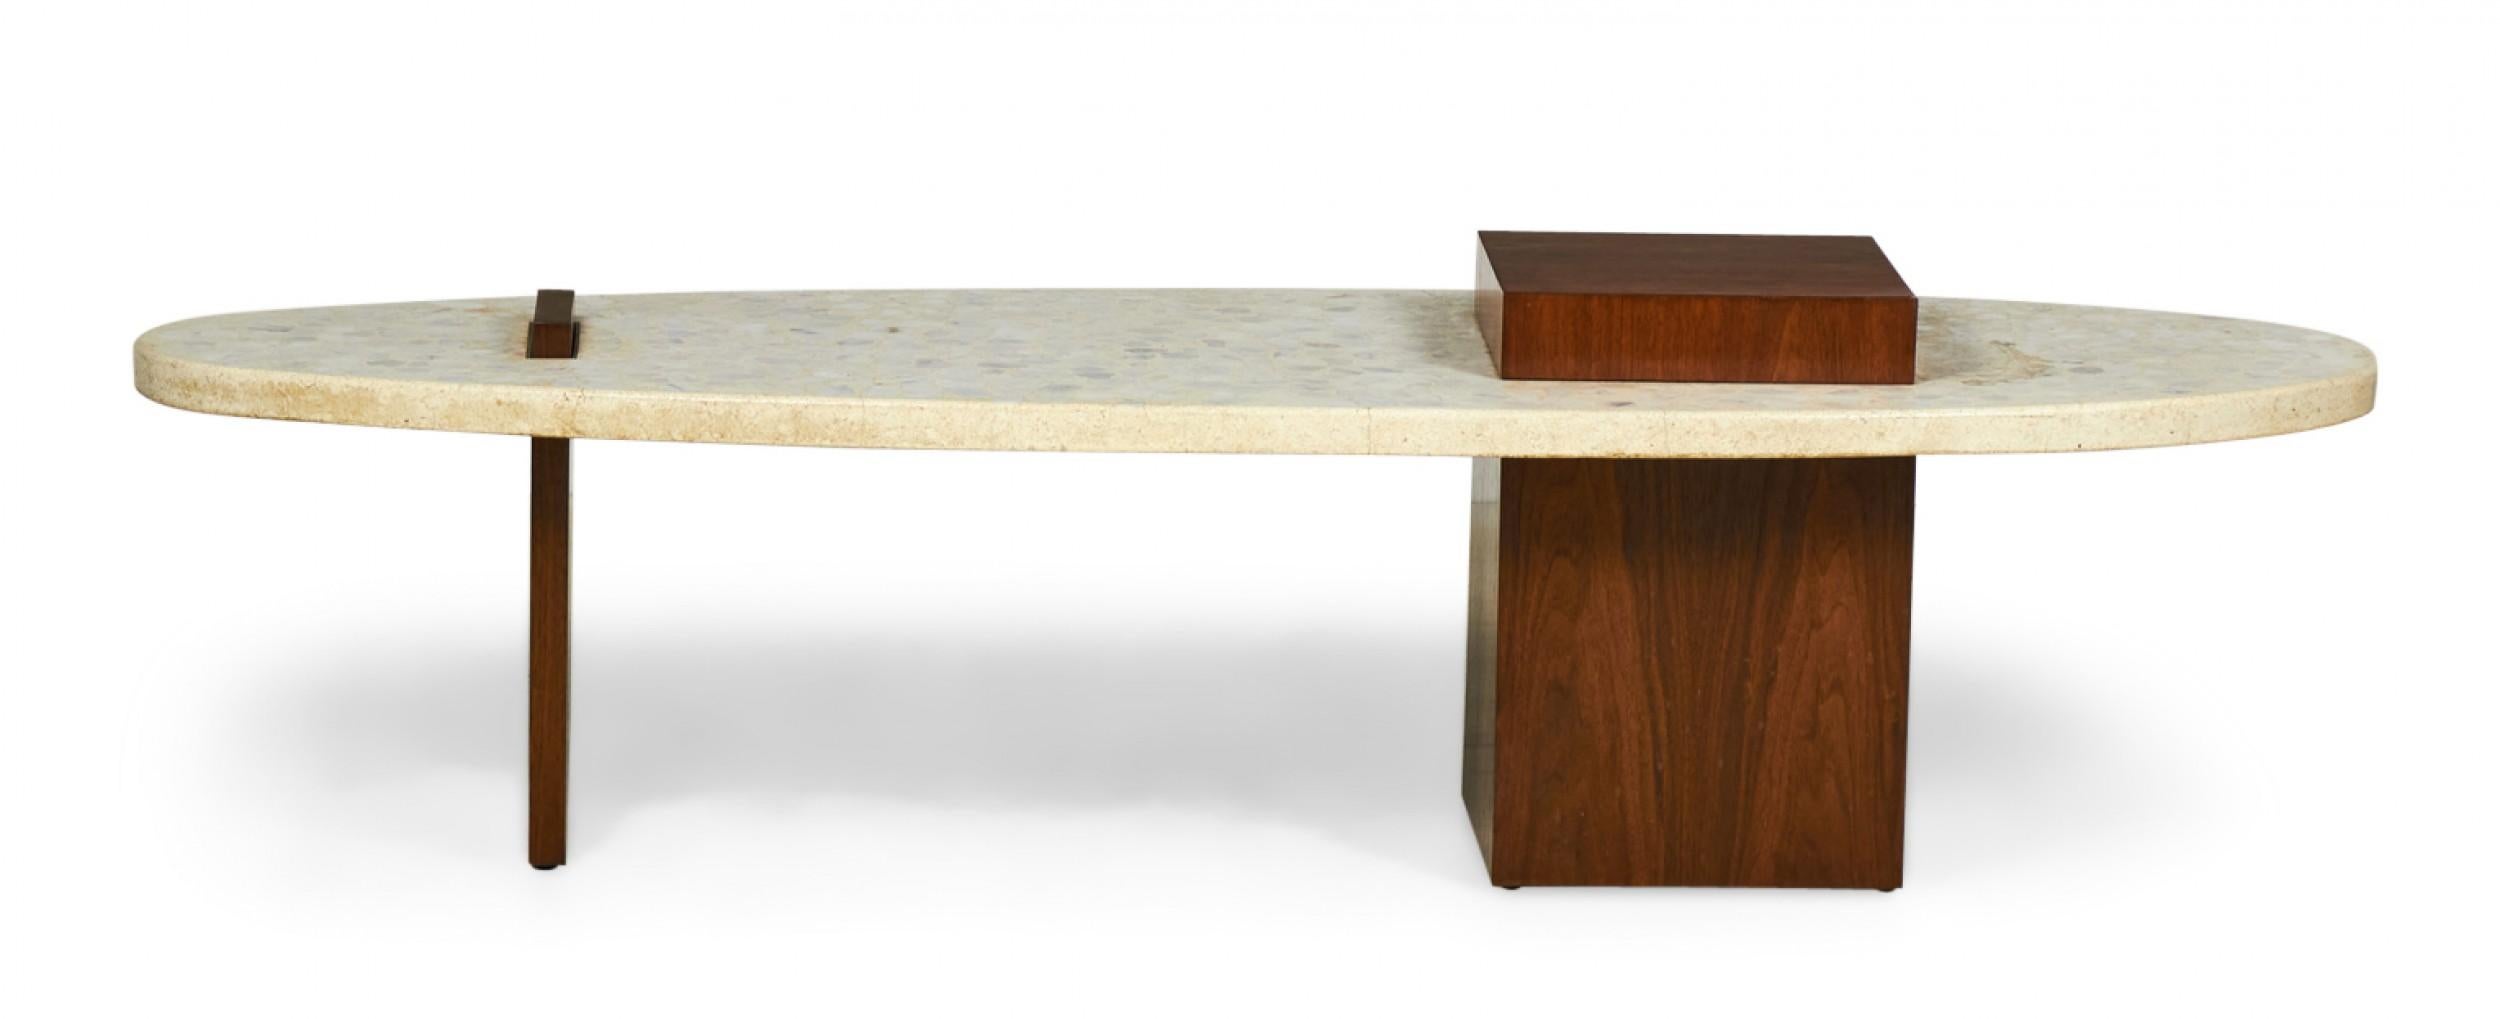 American Terrazzo and Walnut Surfboard-Form Coffee Table 'Manner of Harvey Probber' For Sale